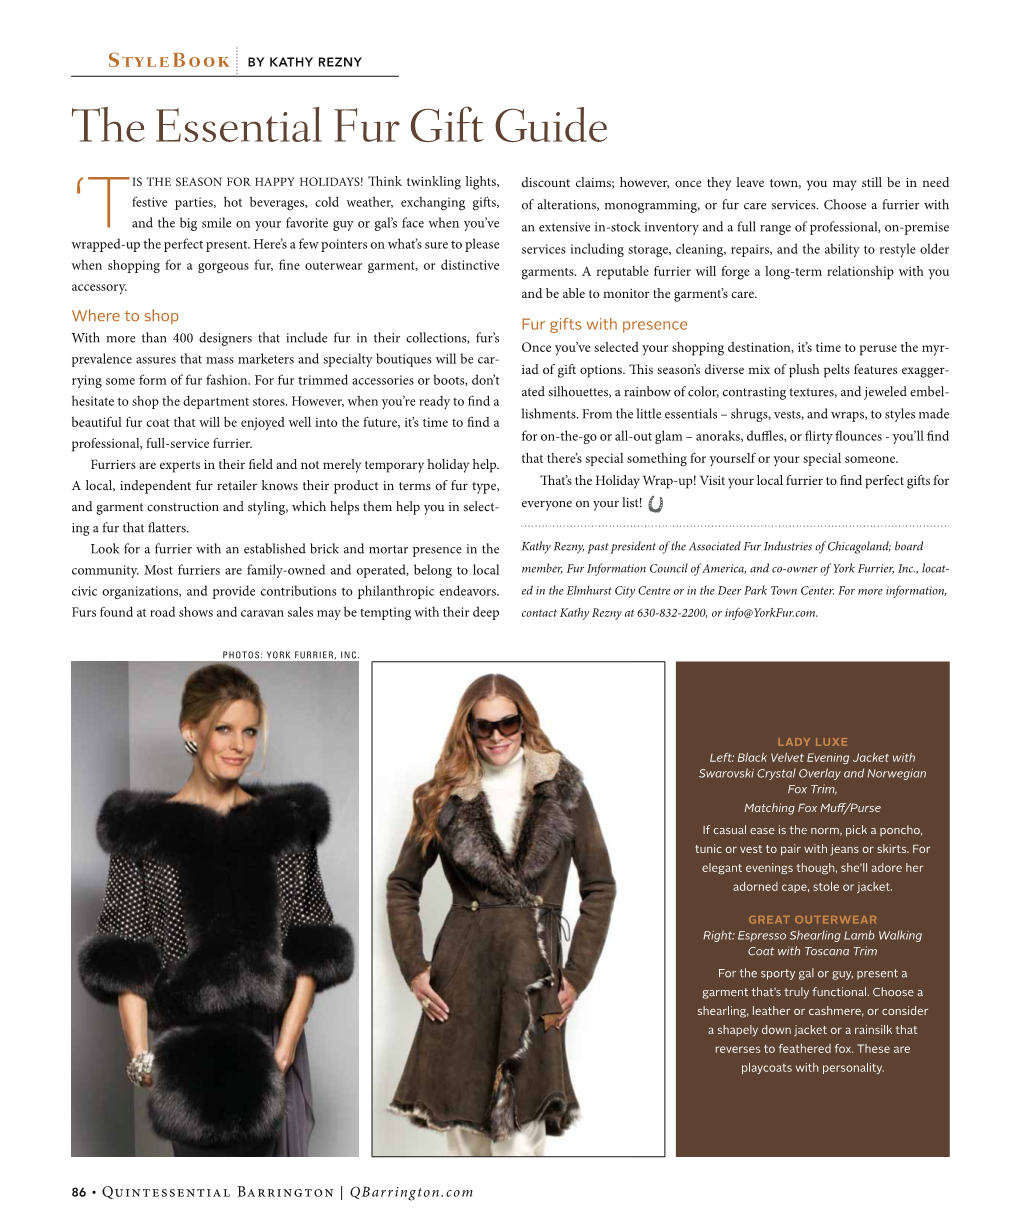 The Essential Fur Gift Guide